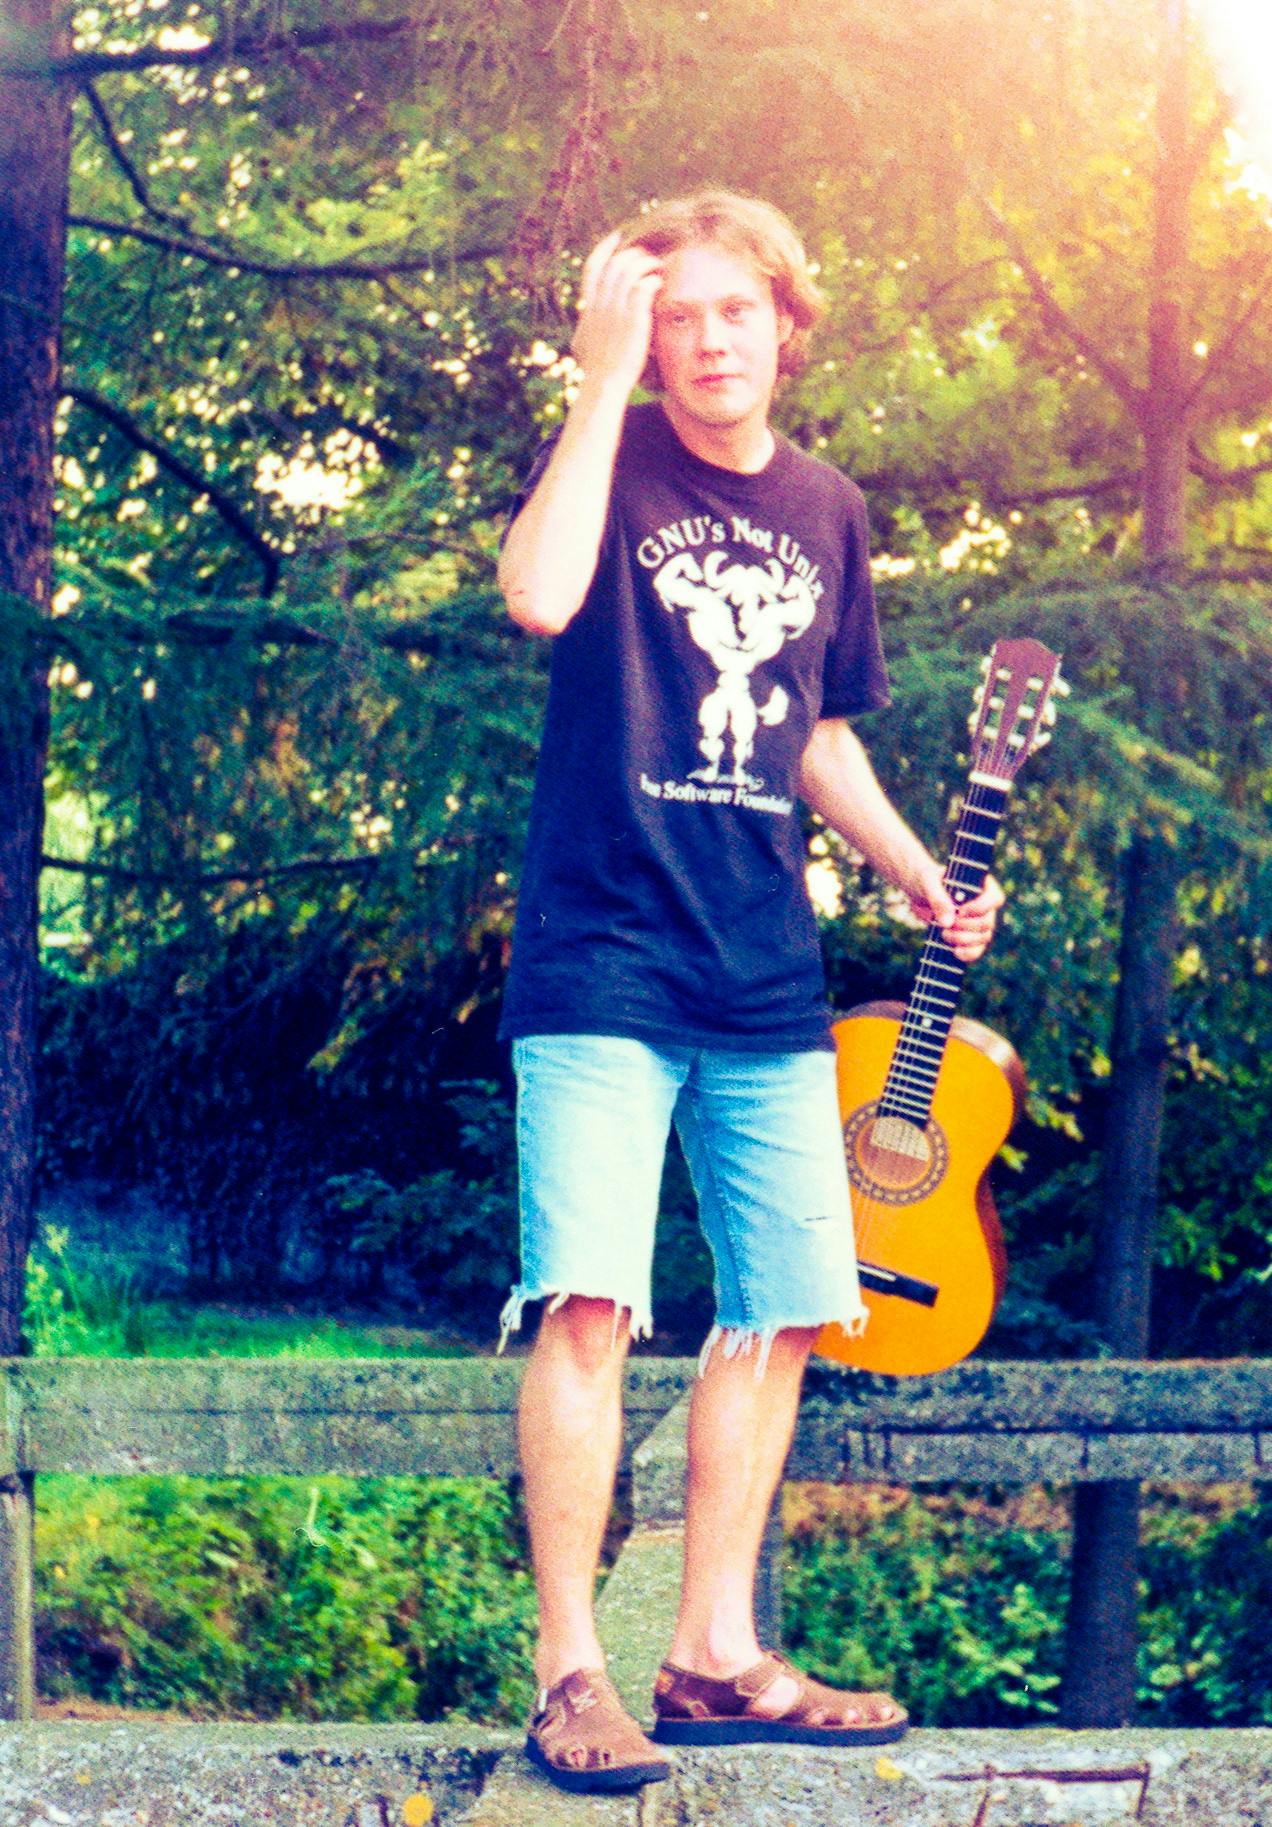 Philippe wearing his signature T-shirt, guitar in hand